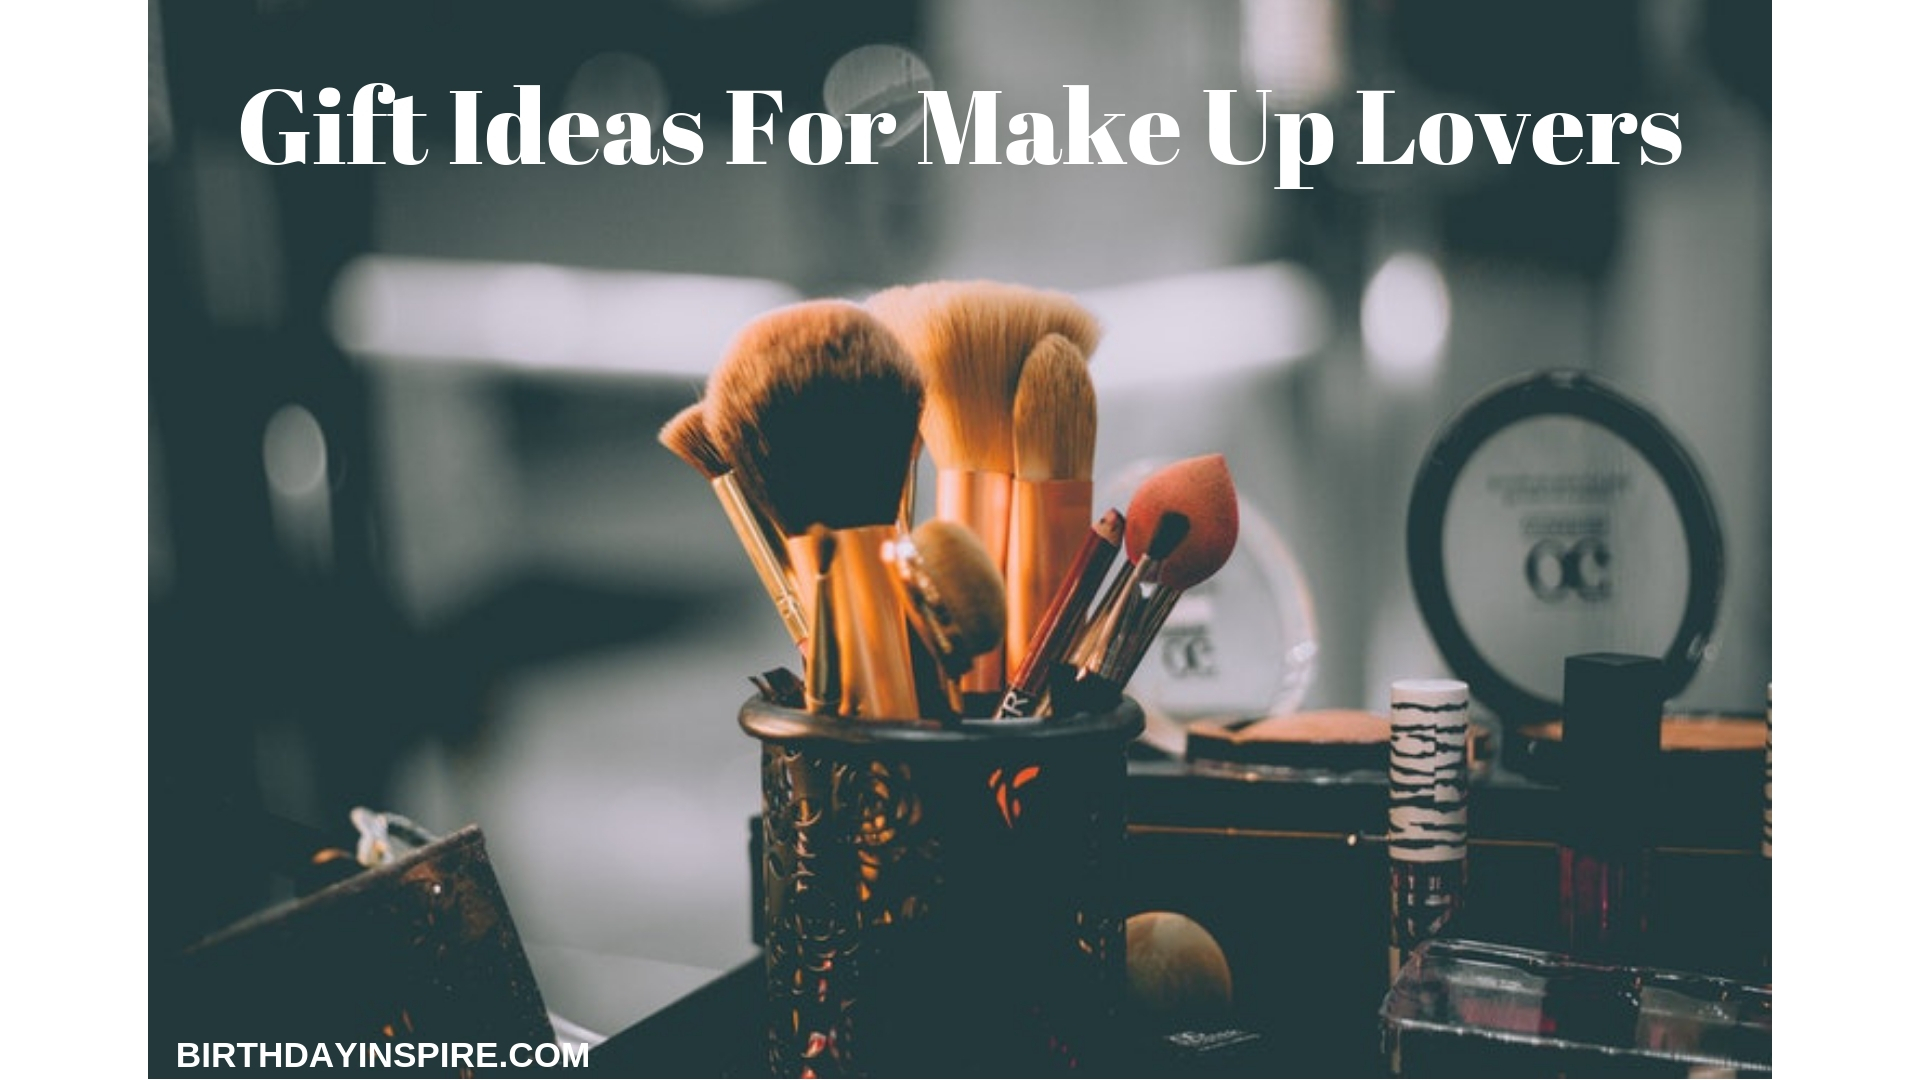 GIFT IDEAS FOR MAKEUP LOVERS